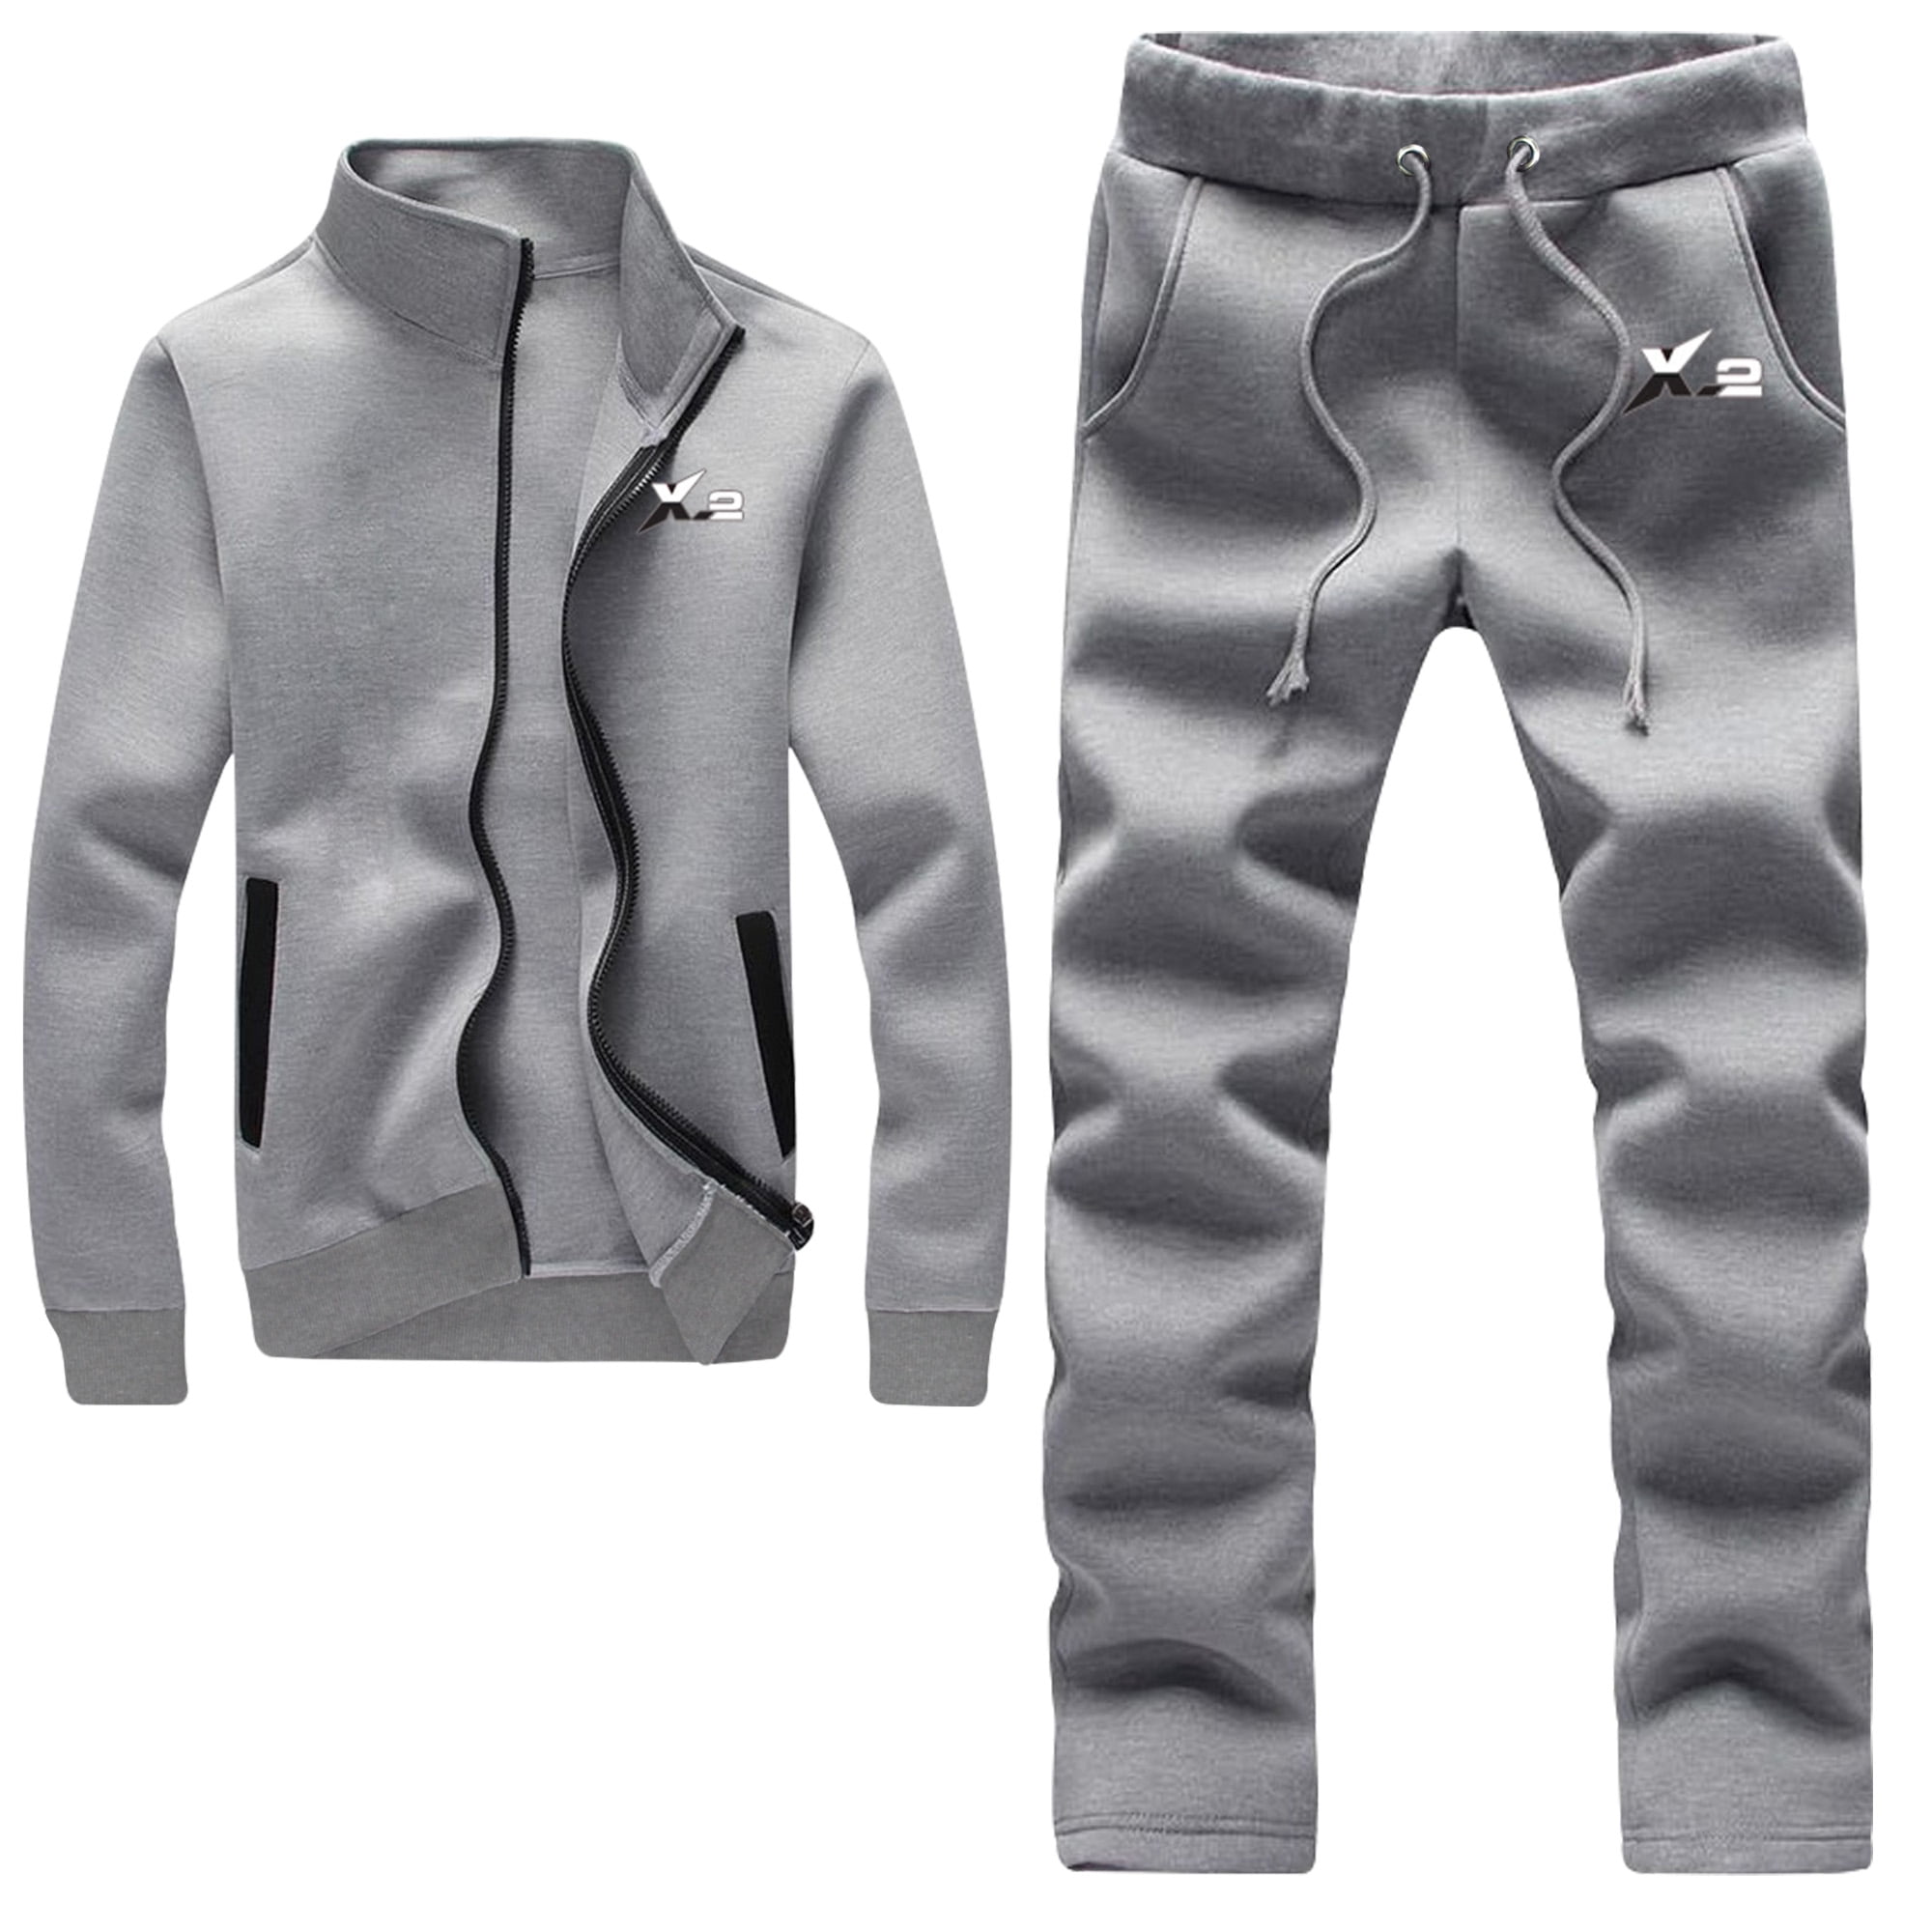  Mens Lightweight Sweatsuits Sets Full-Zip Sweatshirt Jogger  Sweatpants Warm Sports Suit Gym Training Jogging (Gray-A, S) : Clothing,  Shoes & Jewelry